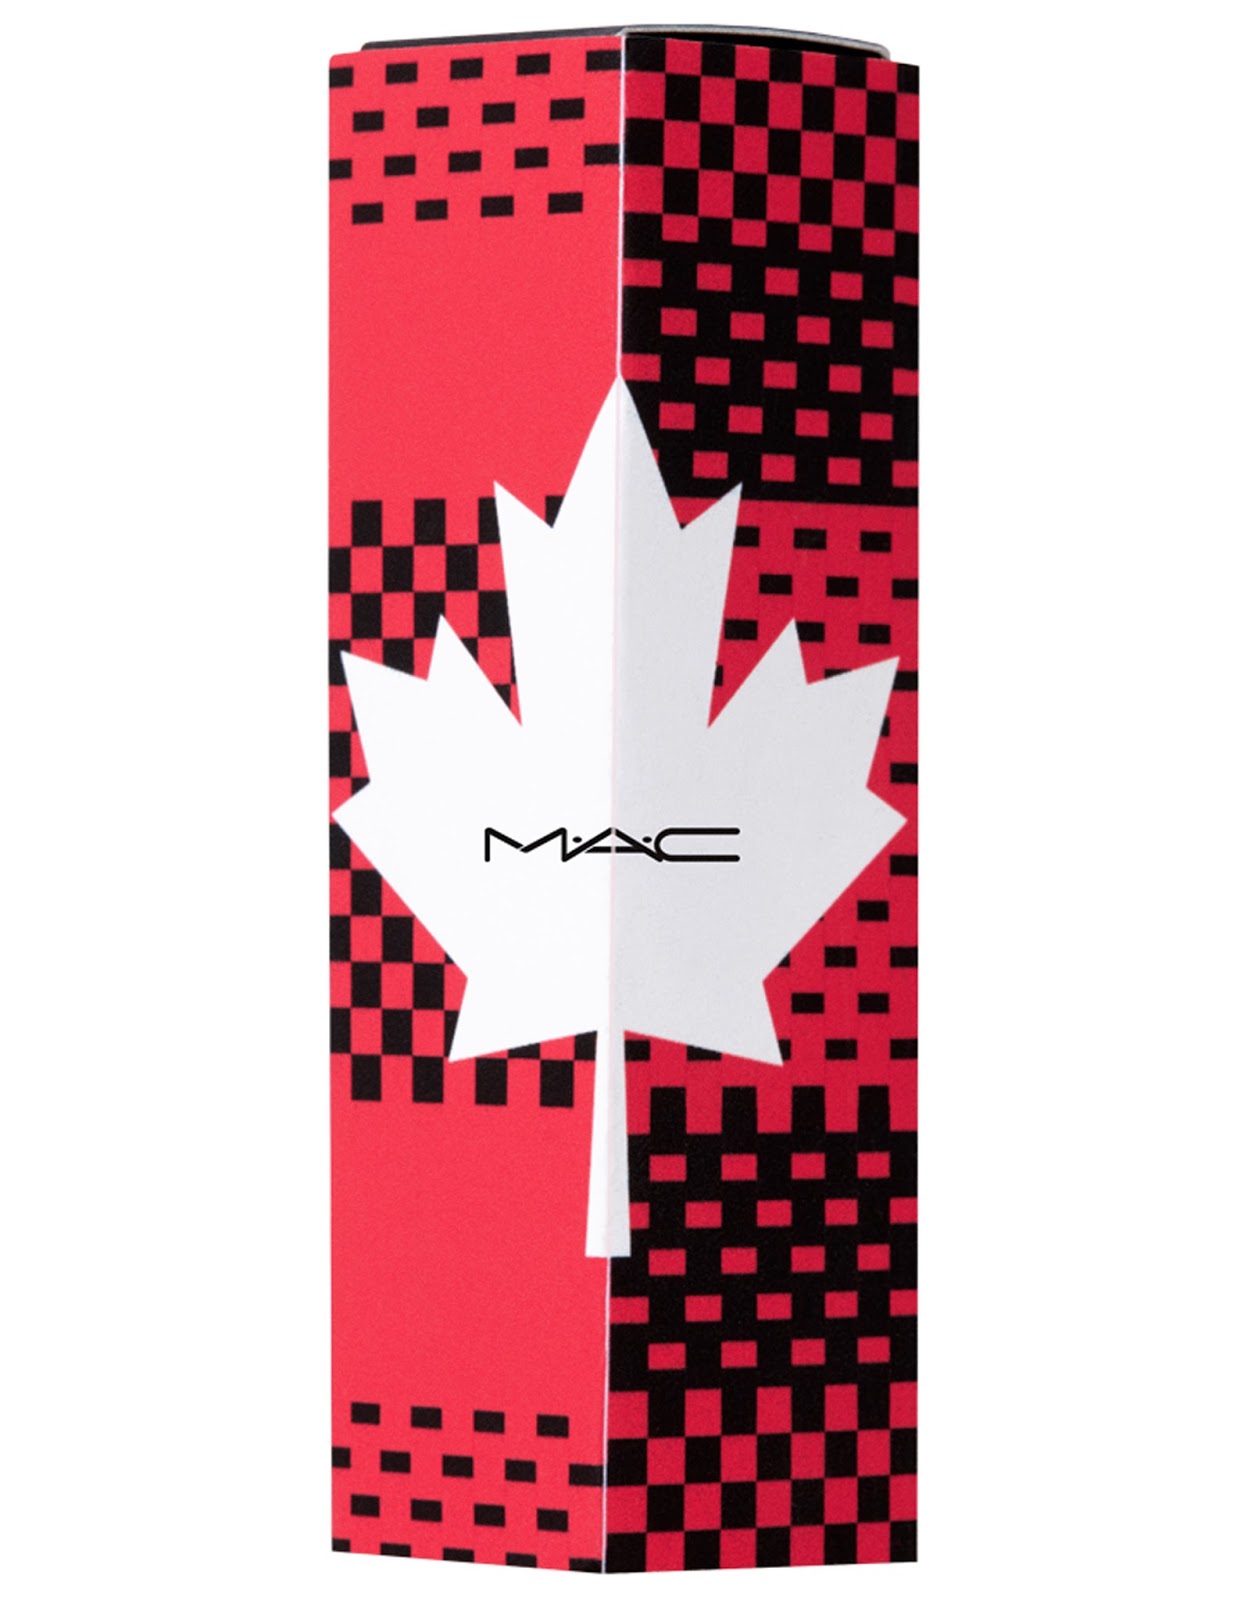 MAC ‘Proud To Be Canadian’ Collection – Information